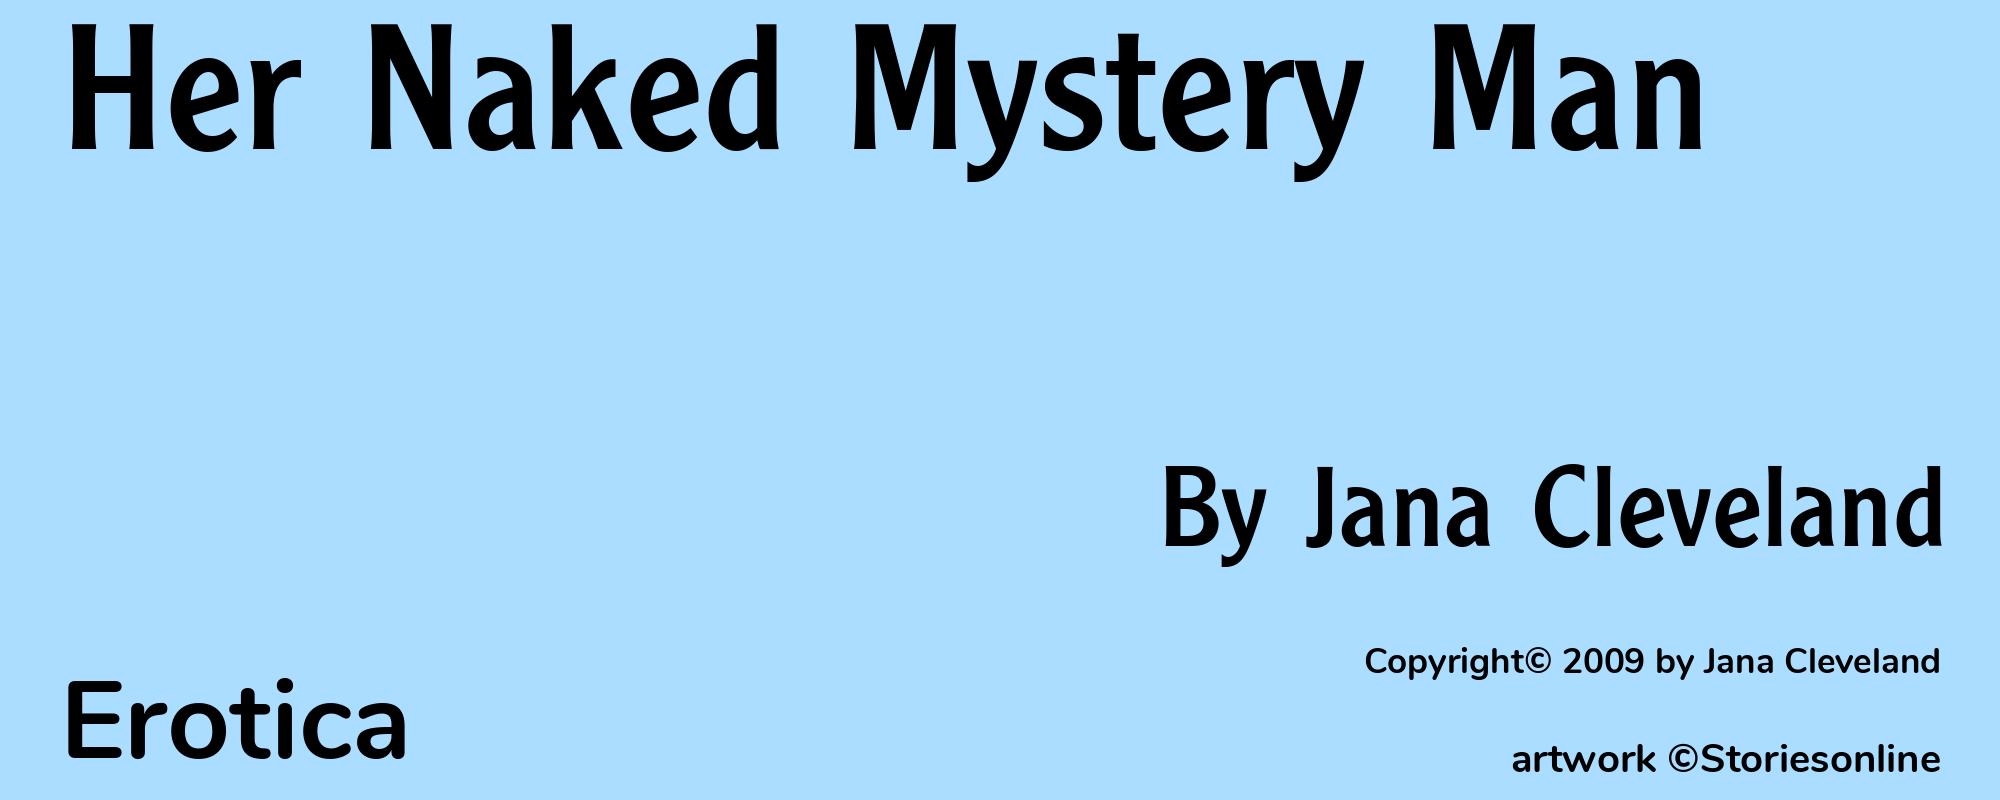 Her Naked Mystery Man - Cover